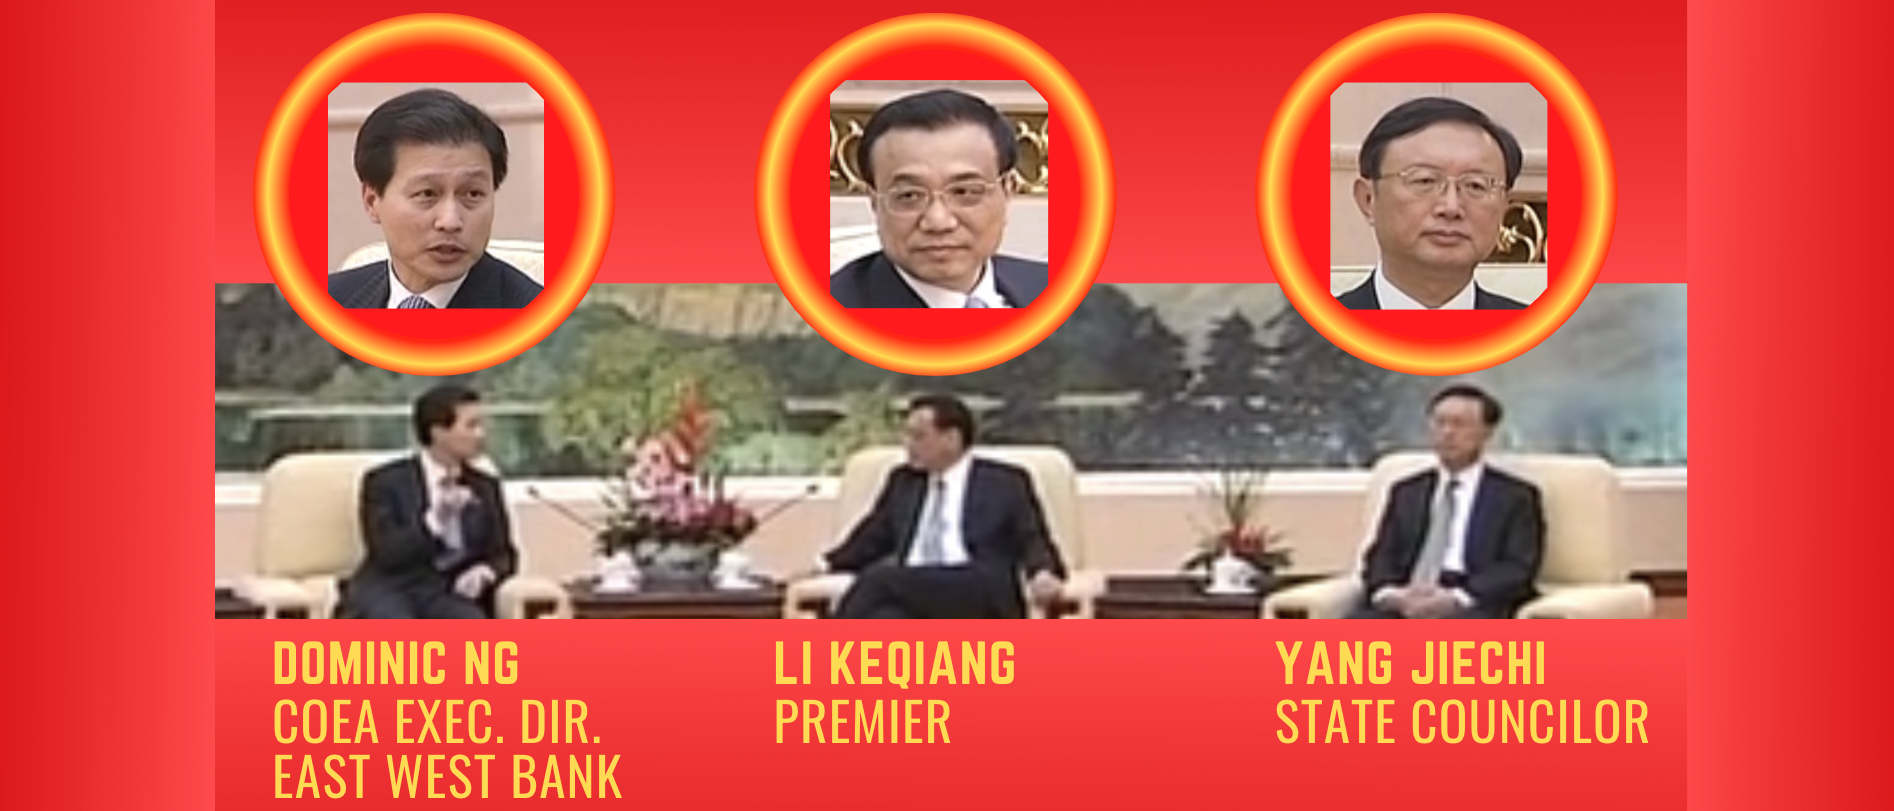 Just months after joining the China Overseas Exchange Association (COEA), Dominic Ng led a delegation to Beijing in November 2013 to meet with COEA's heads as well as top CCP brass including Li Keqiang and Yang Jiechi. Image created by the Daily Caller News Foundation. [Screenshots/CCTVNews]